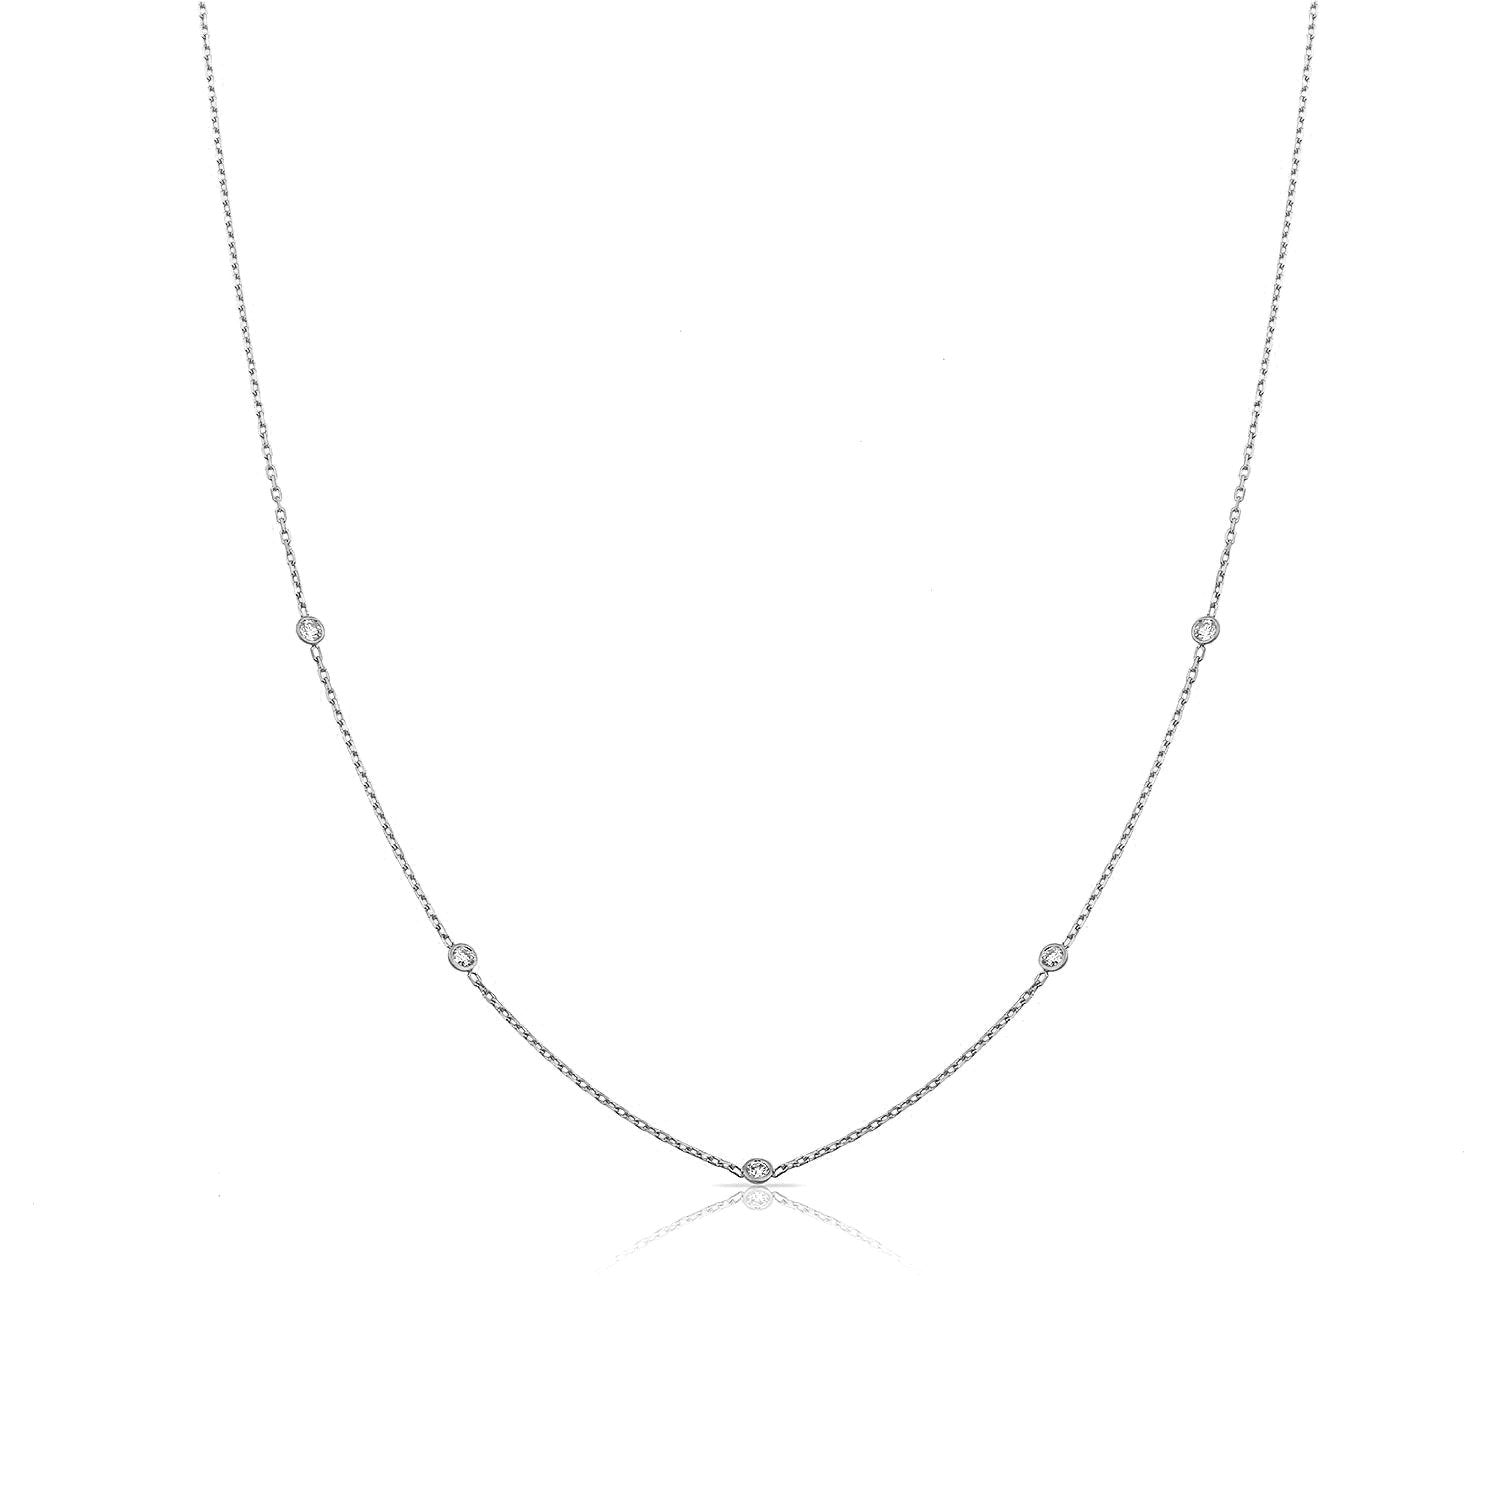 Loverly Crystal Dotted Necklace JEWELRY The Sis Kiss Silver